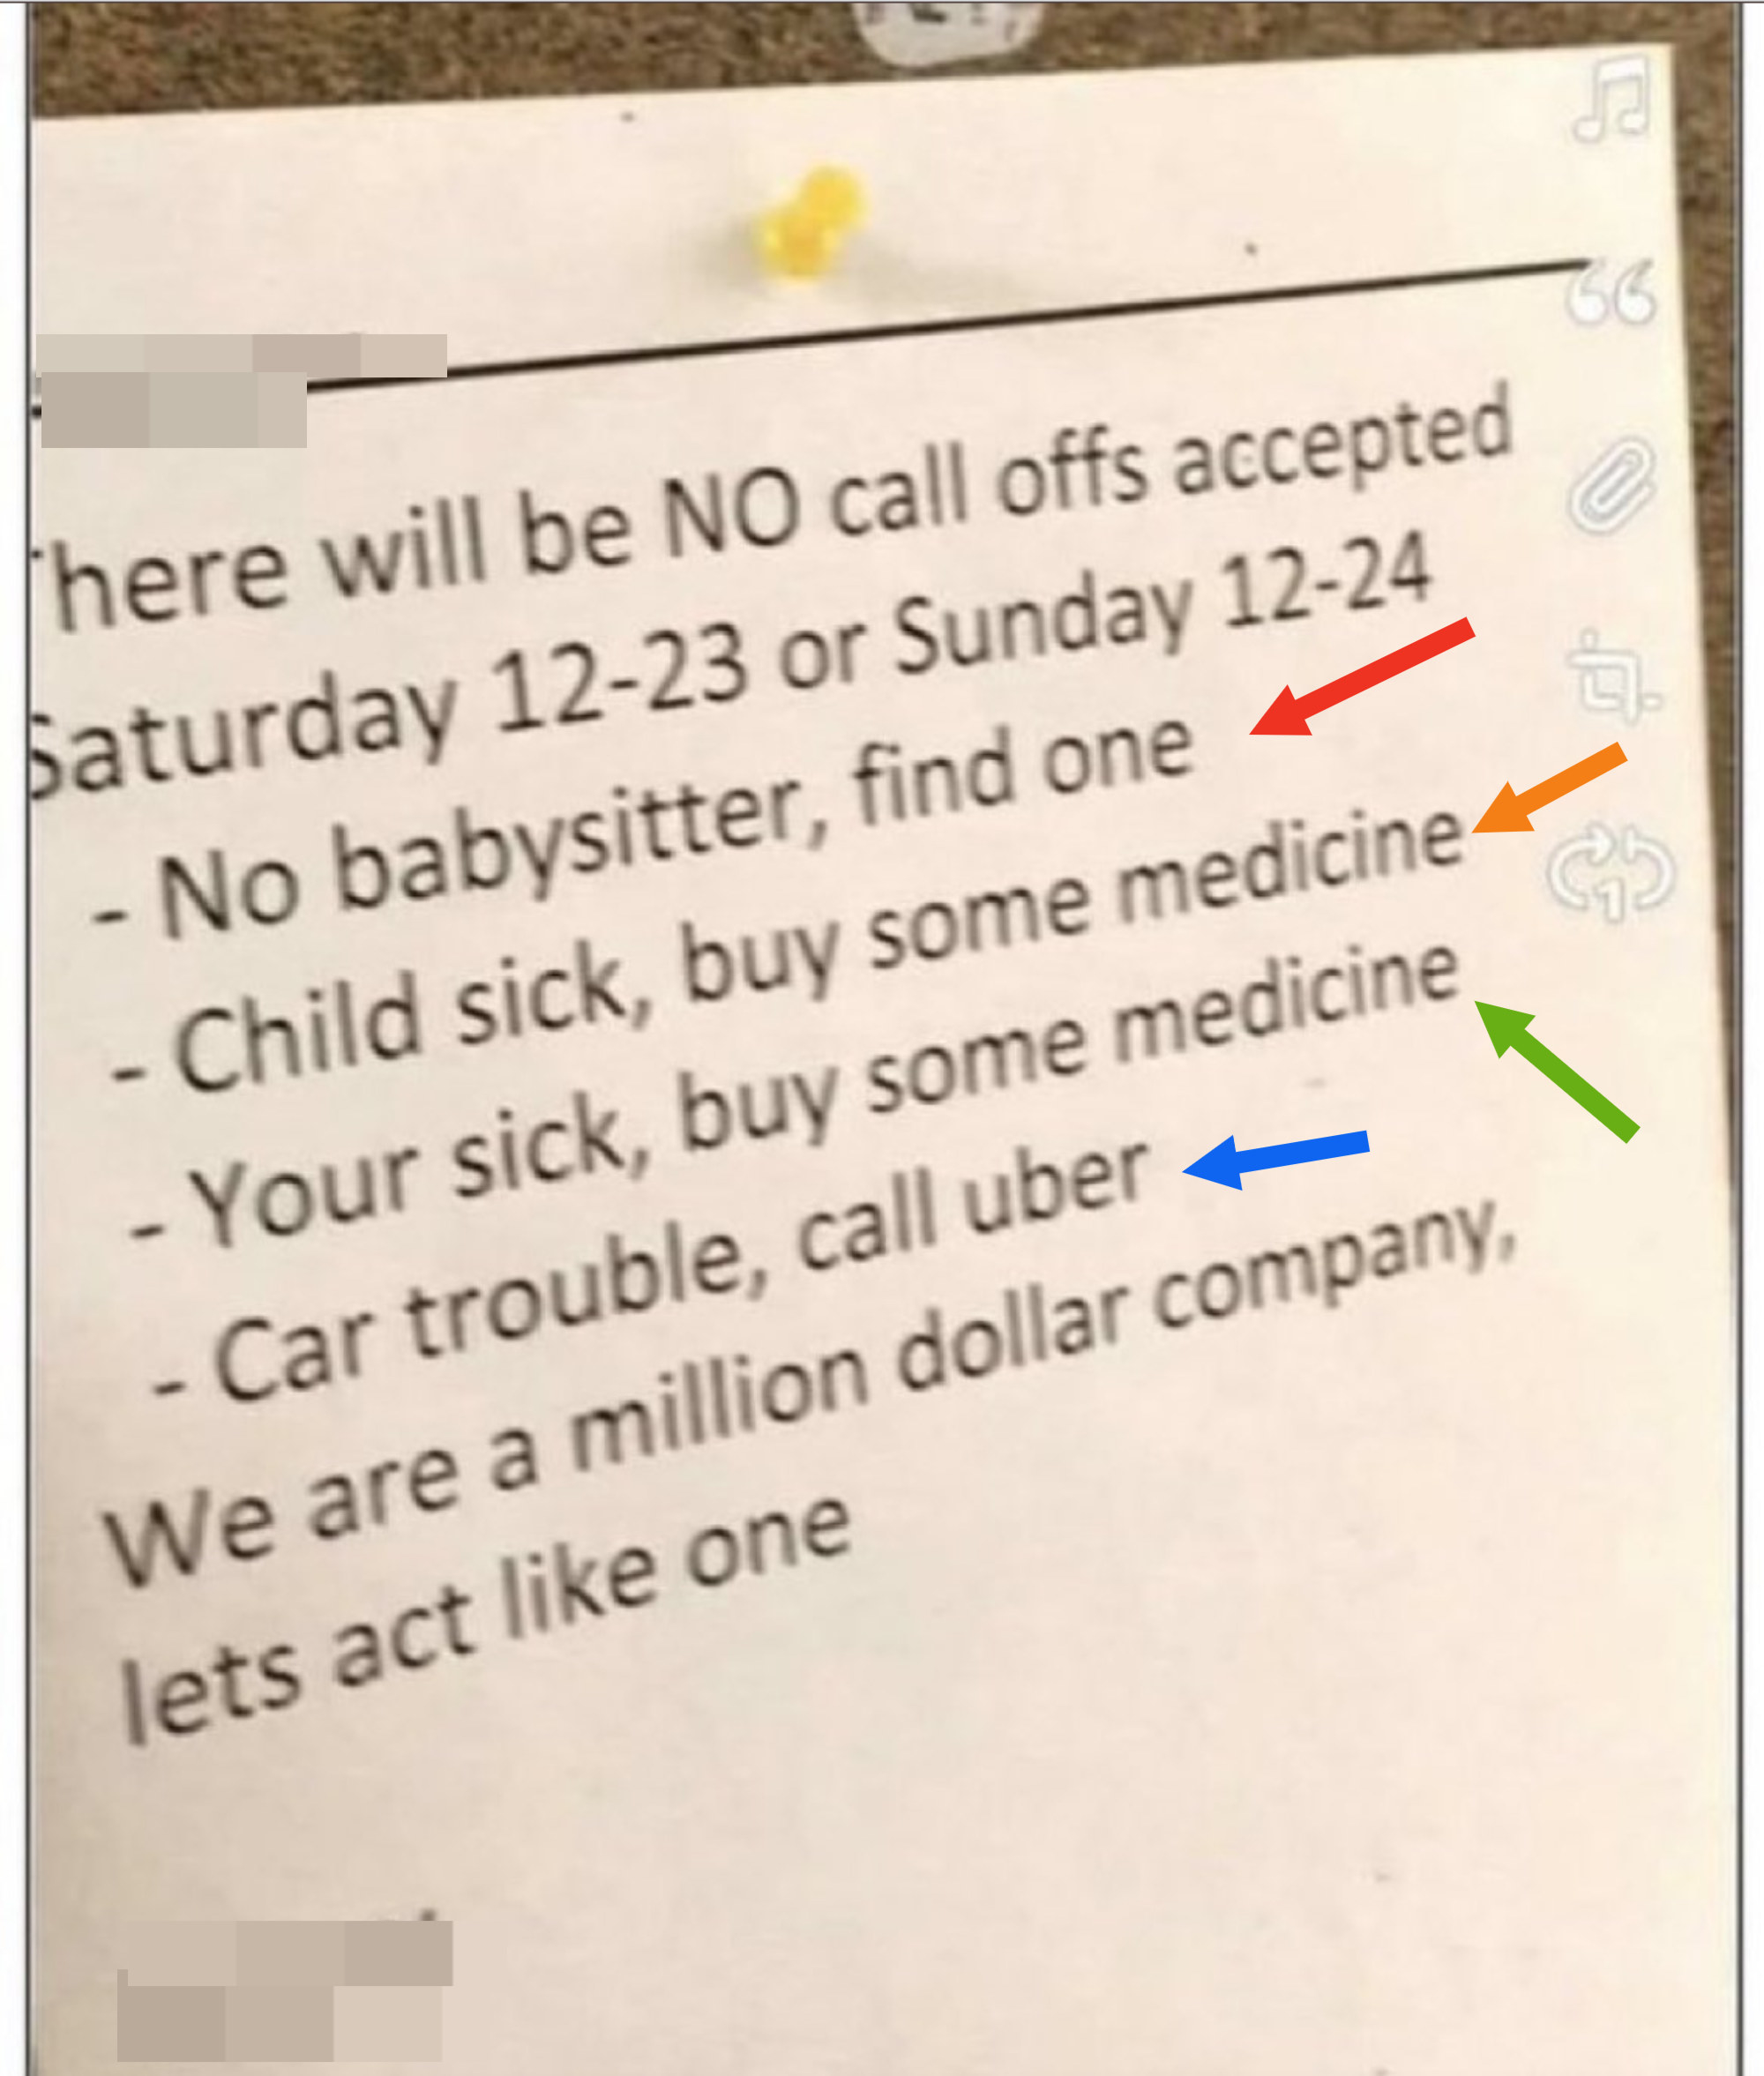 arrows pointing to the different &quot;excuses&quot; they will not be hearing for call offs